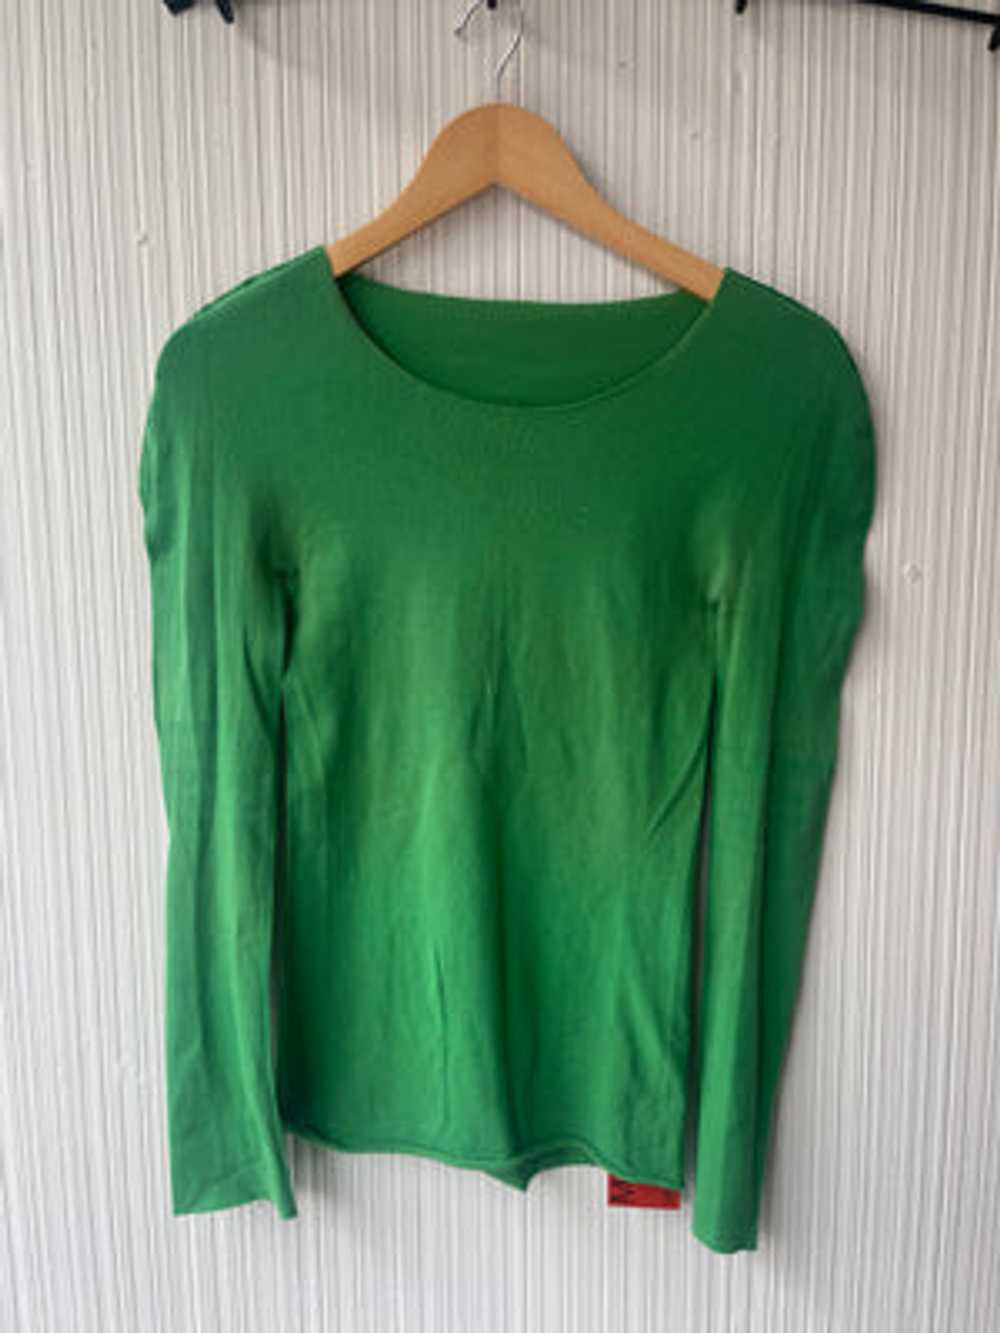 Issey Miyake APOC green woven net neck top - image 2